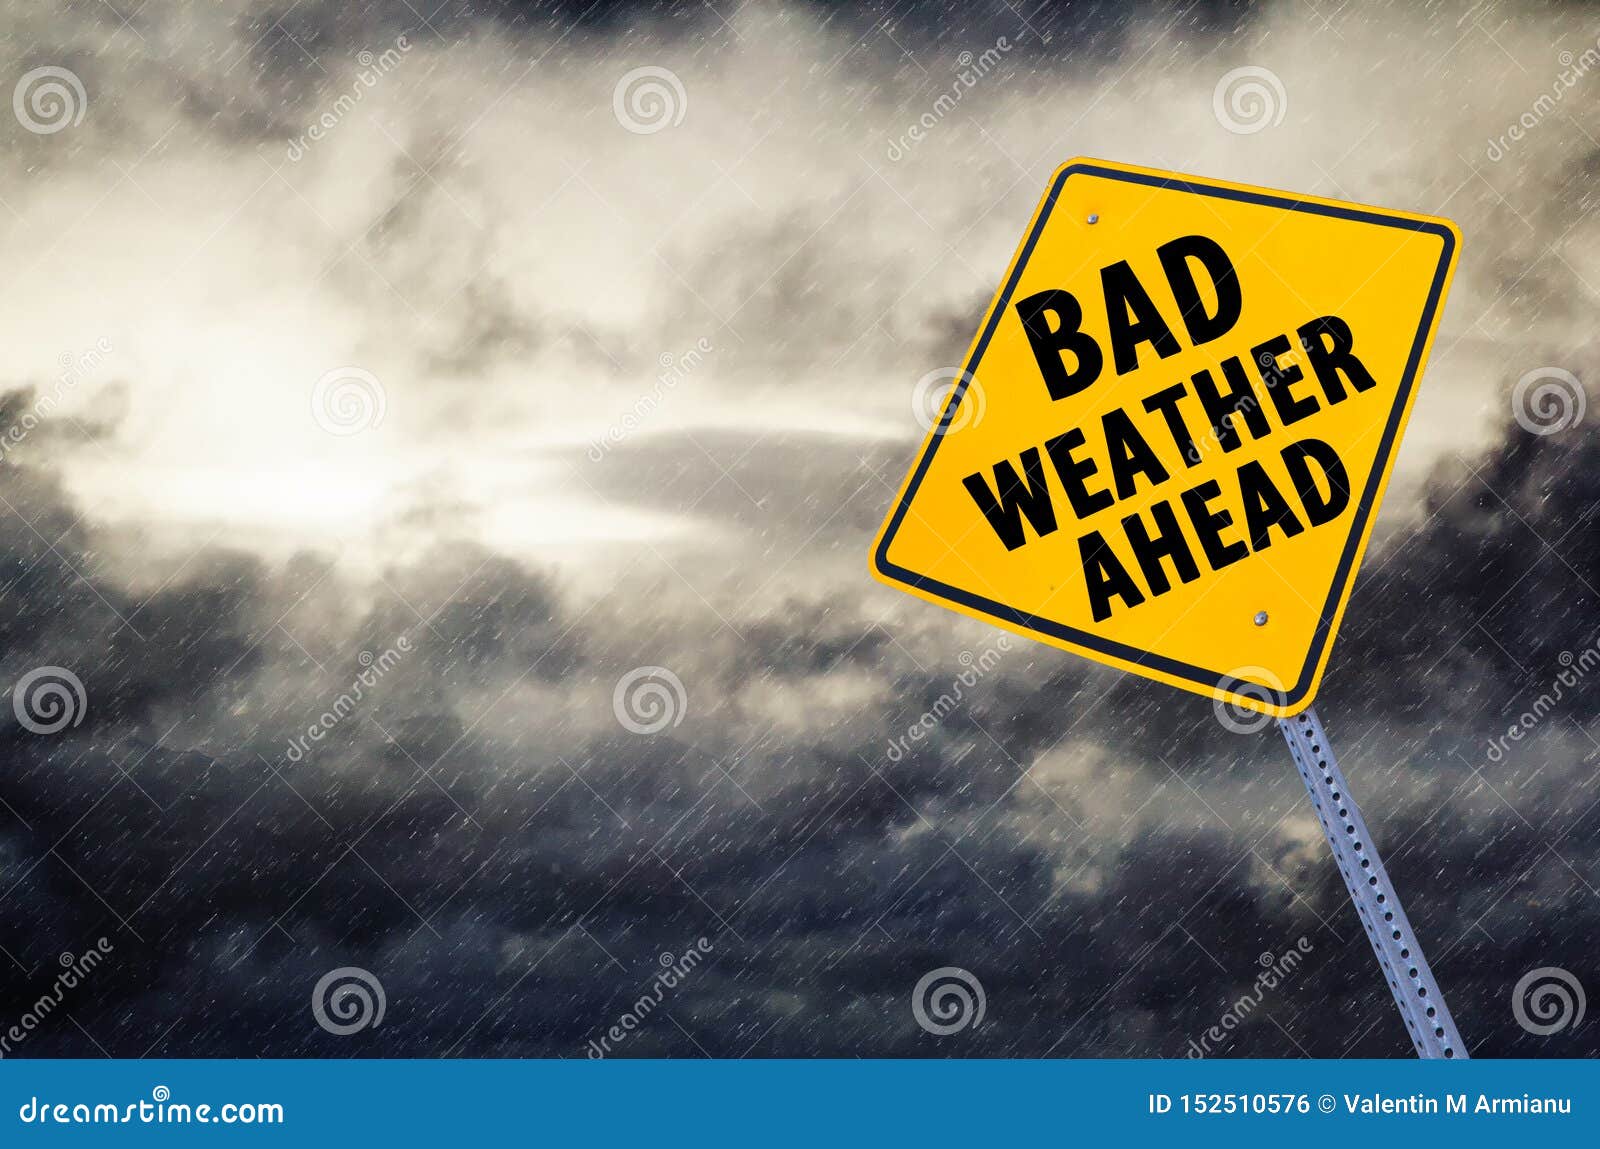 bad weather ahead  road sign